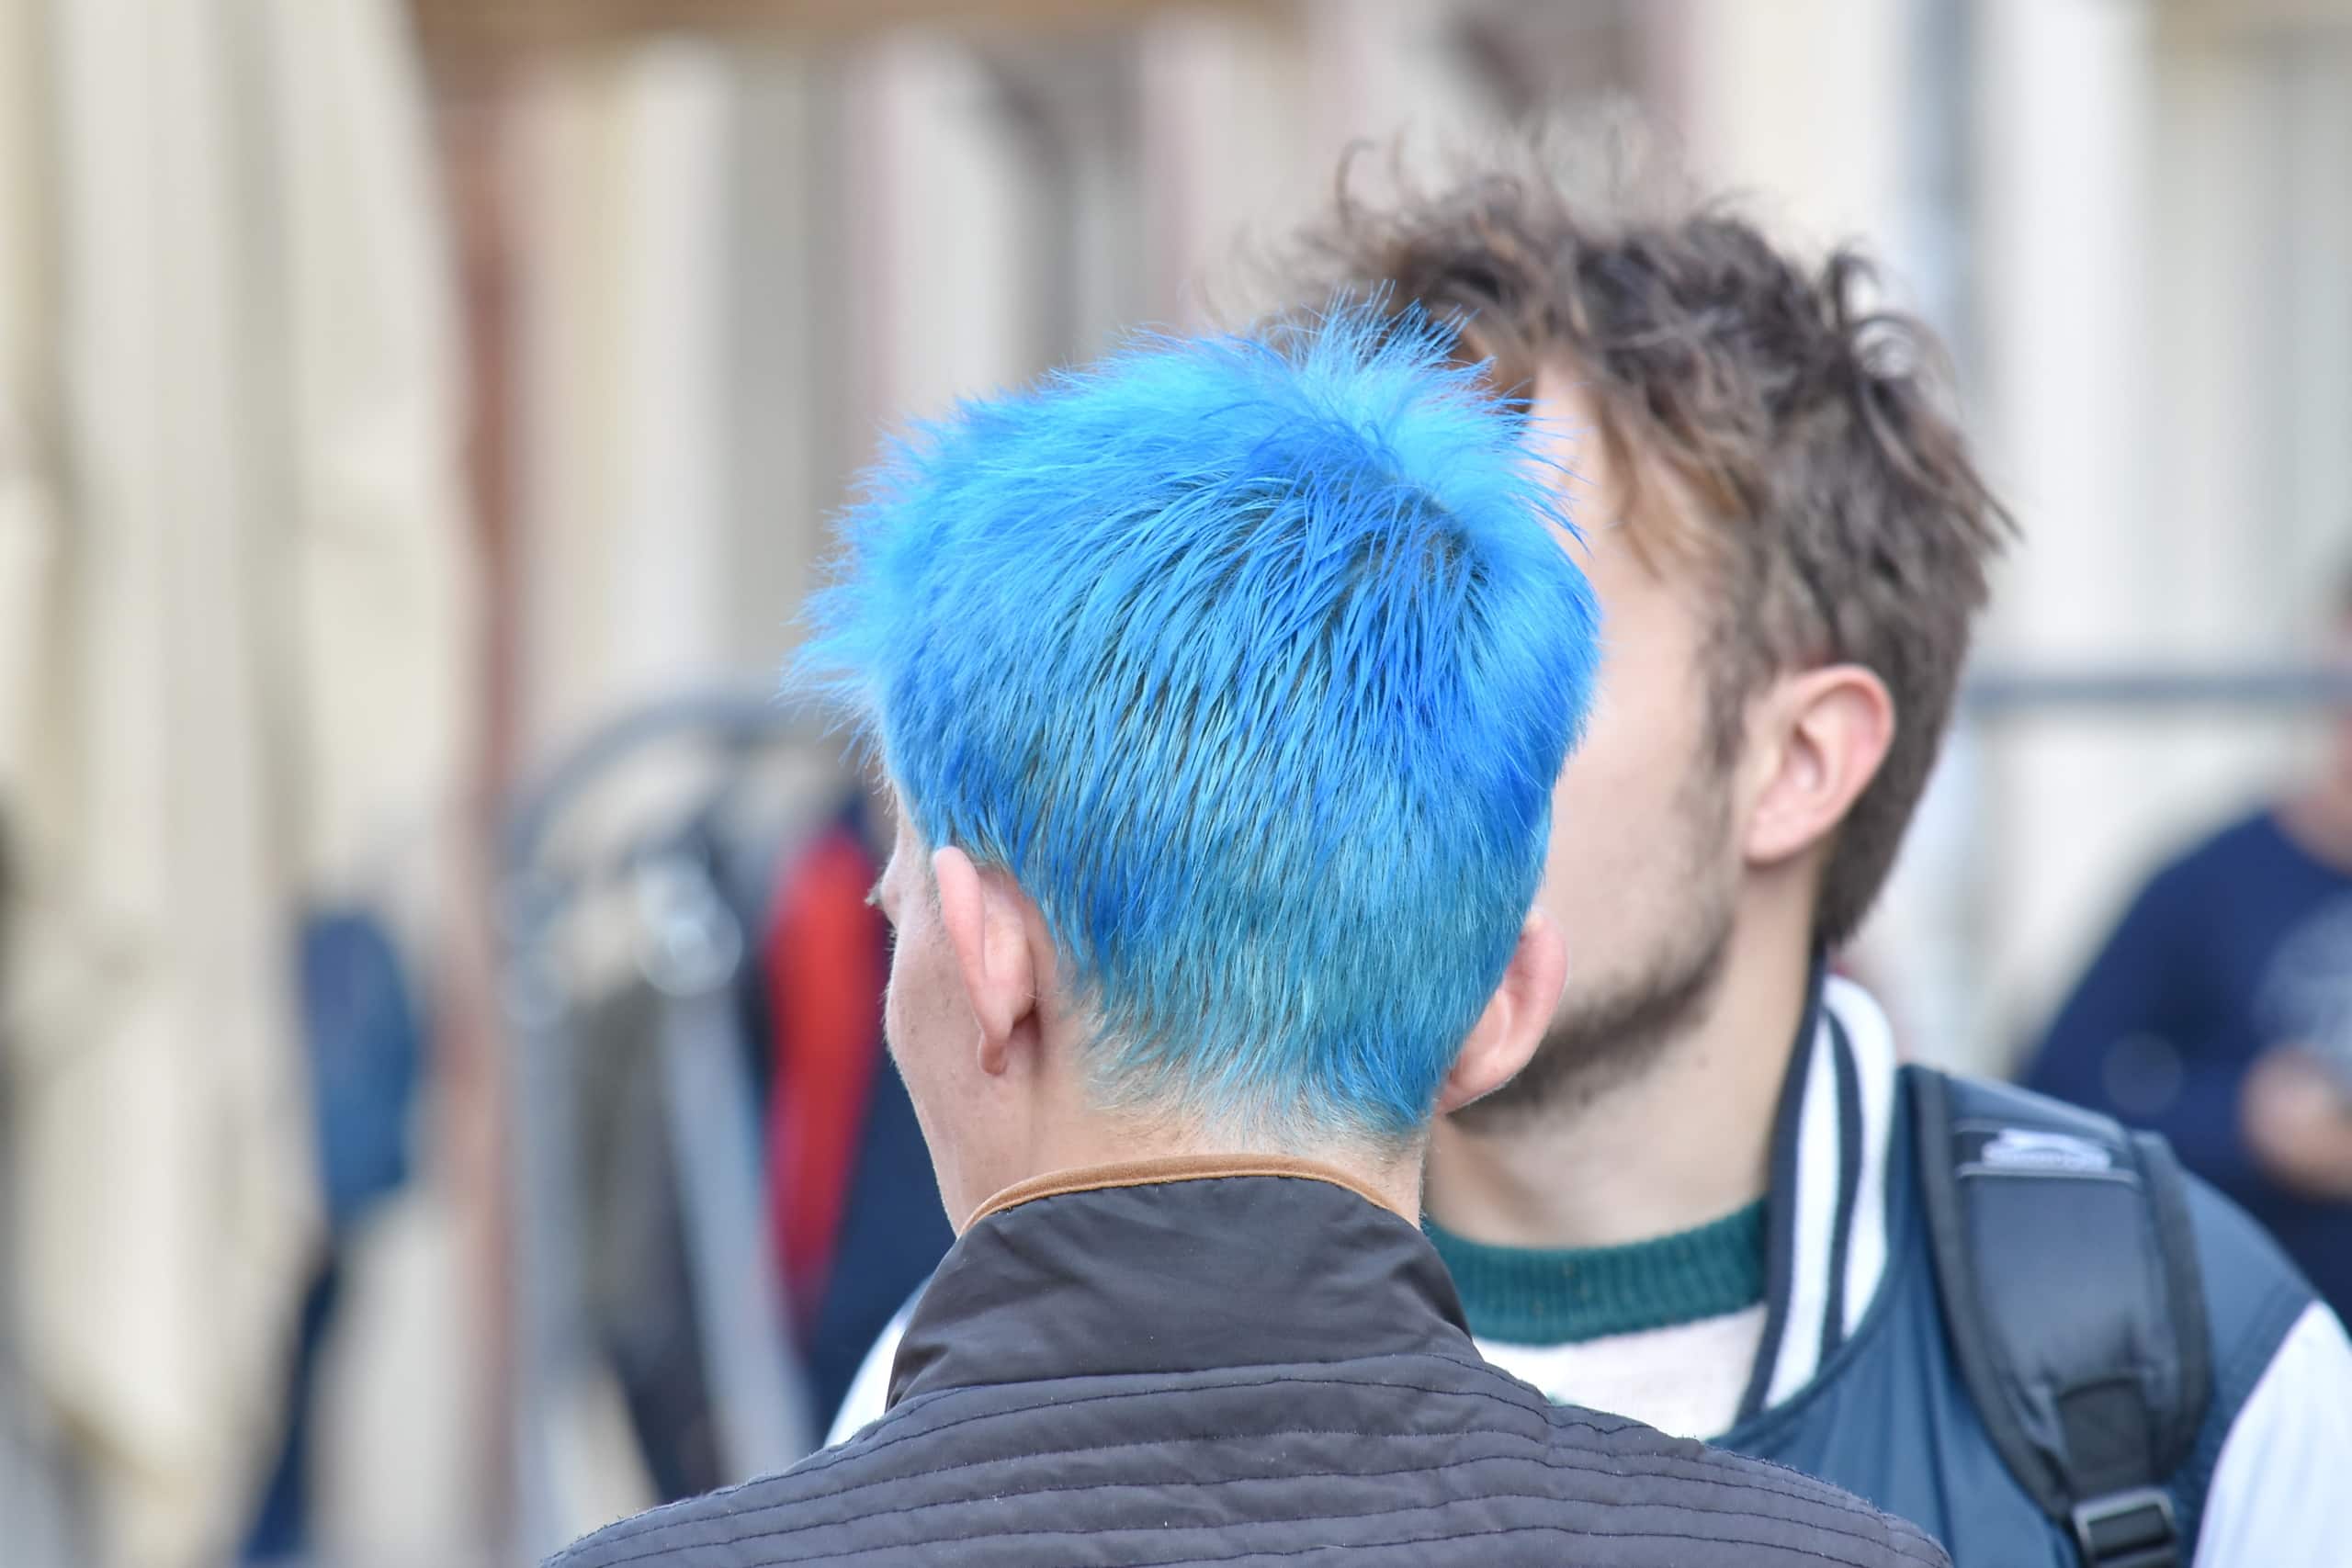 Free picture: blue, hair, hairstyle, man, people, outdoors, portrait,  street, city, casual